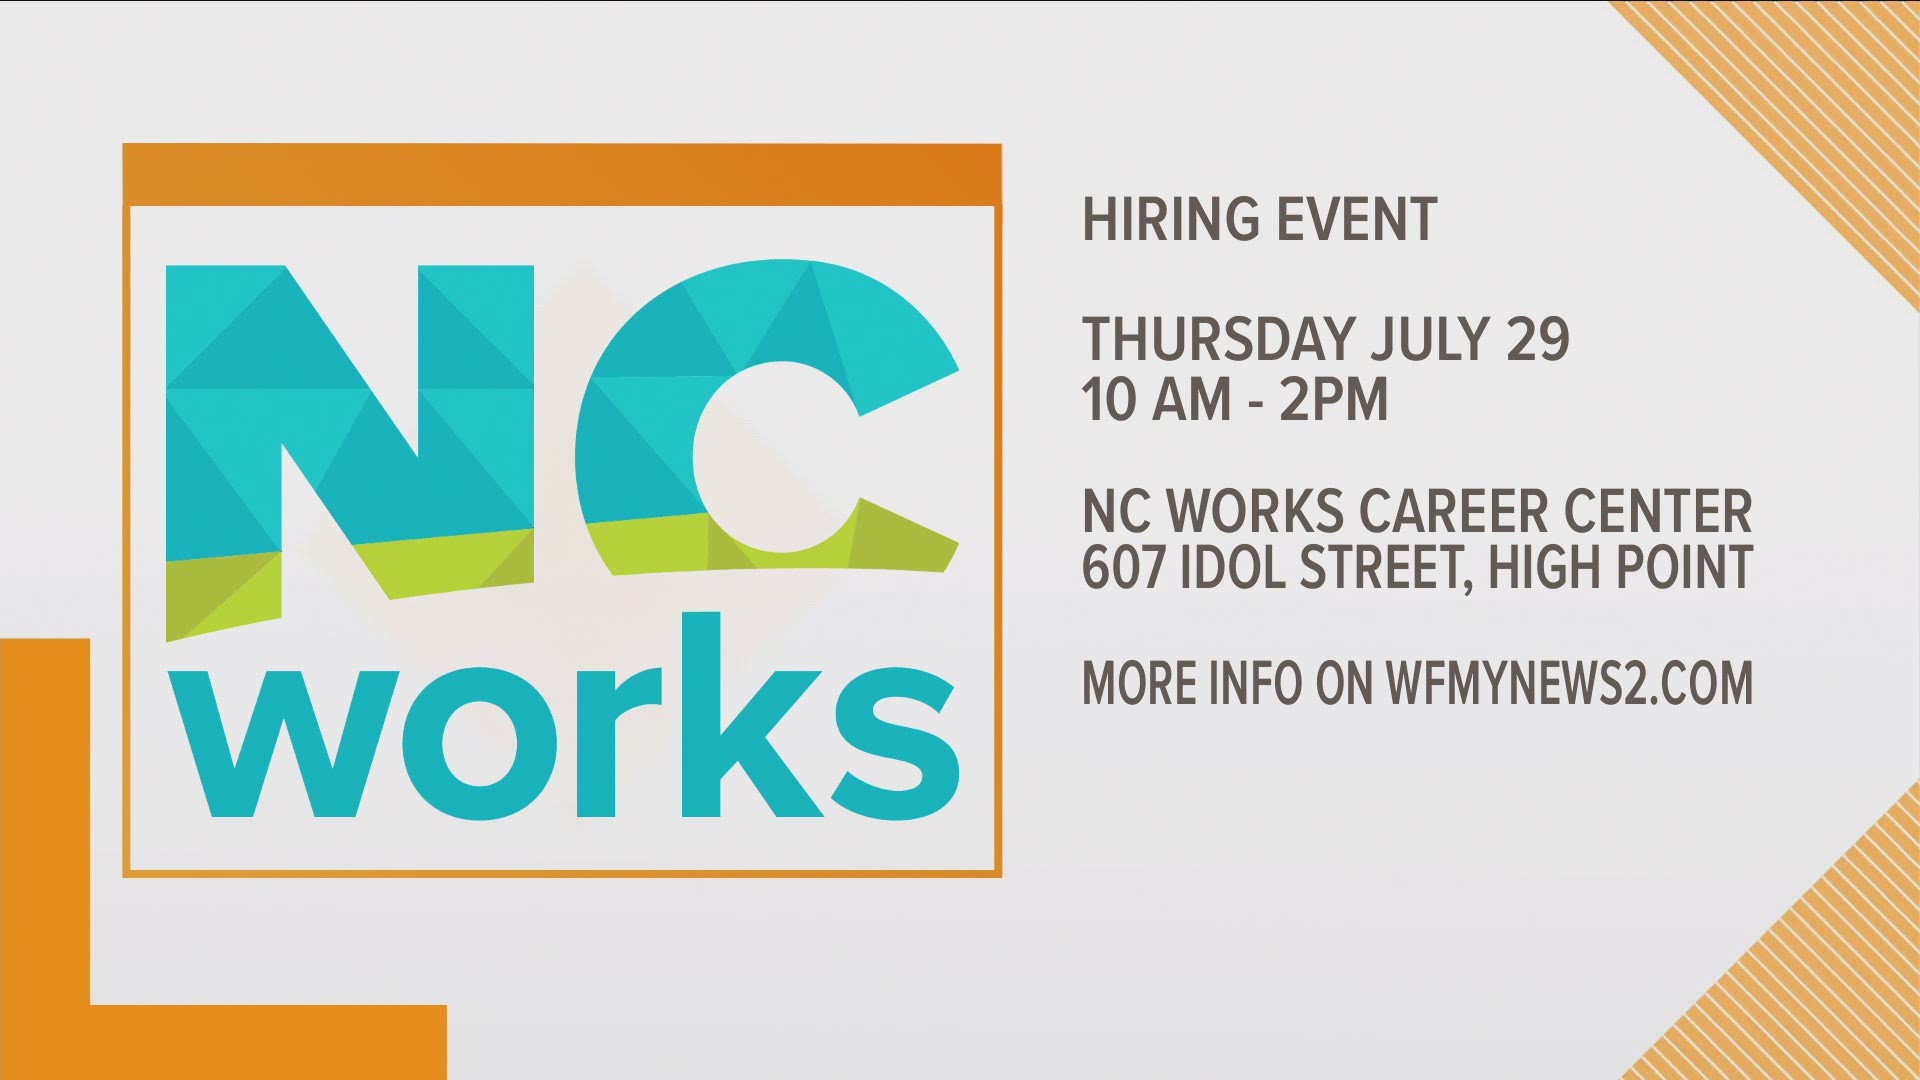 Thursday at the Career Center in High Point